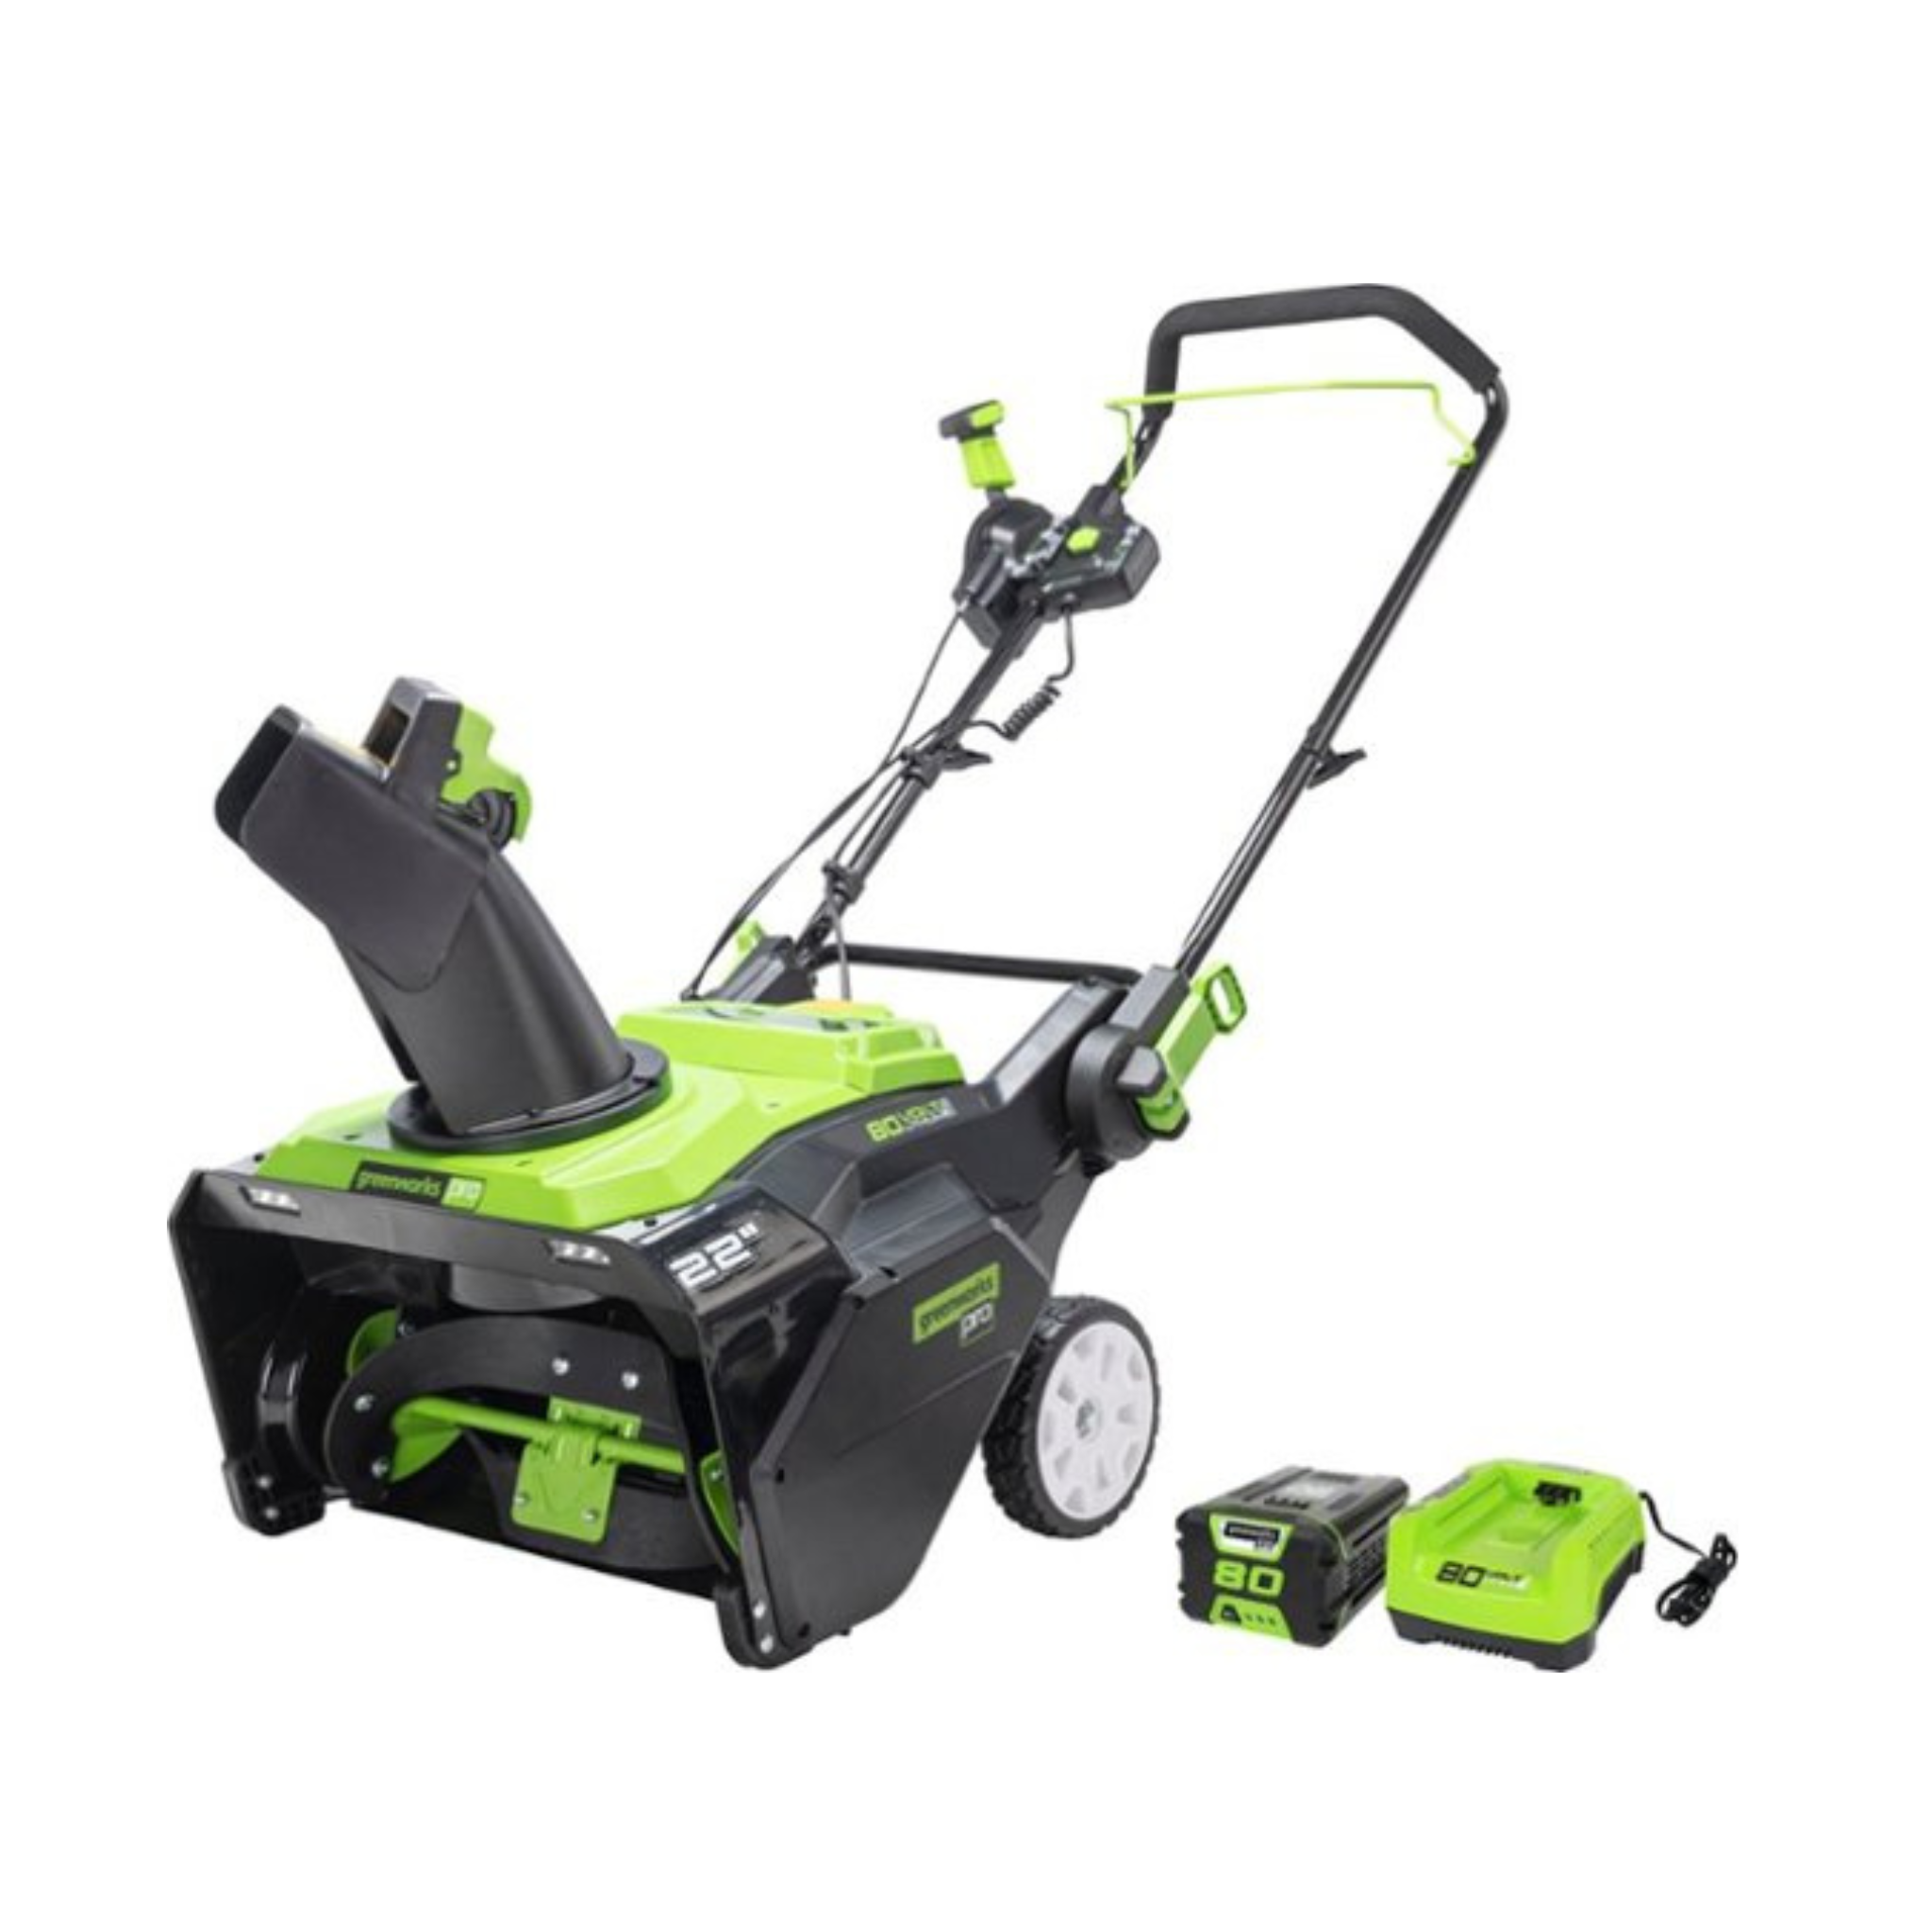 22" Greenworks Pro 80V Brushless Snow Blower w/ 4.0Ah Battery & Charger